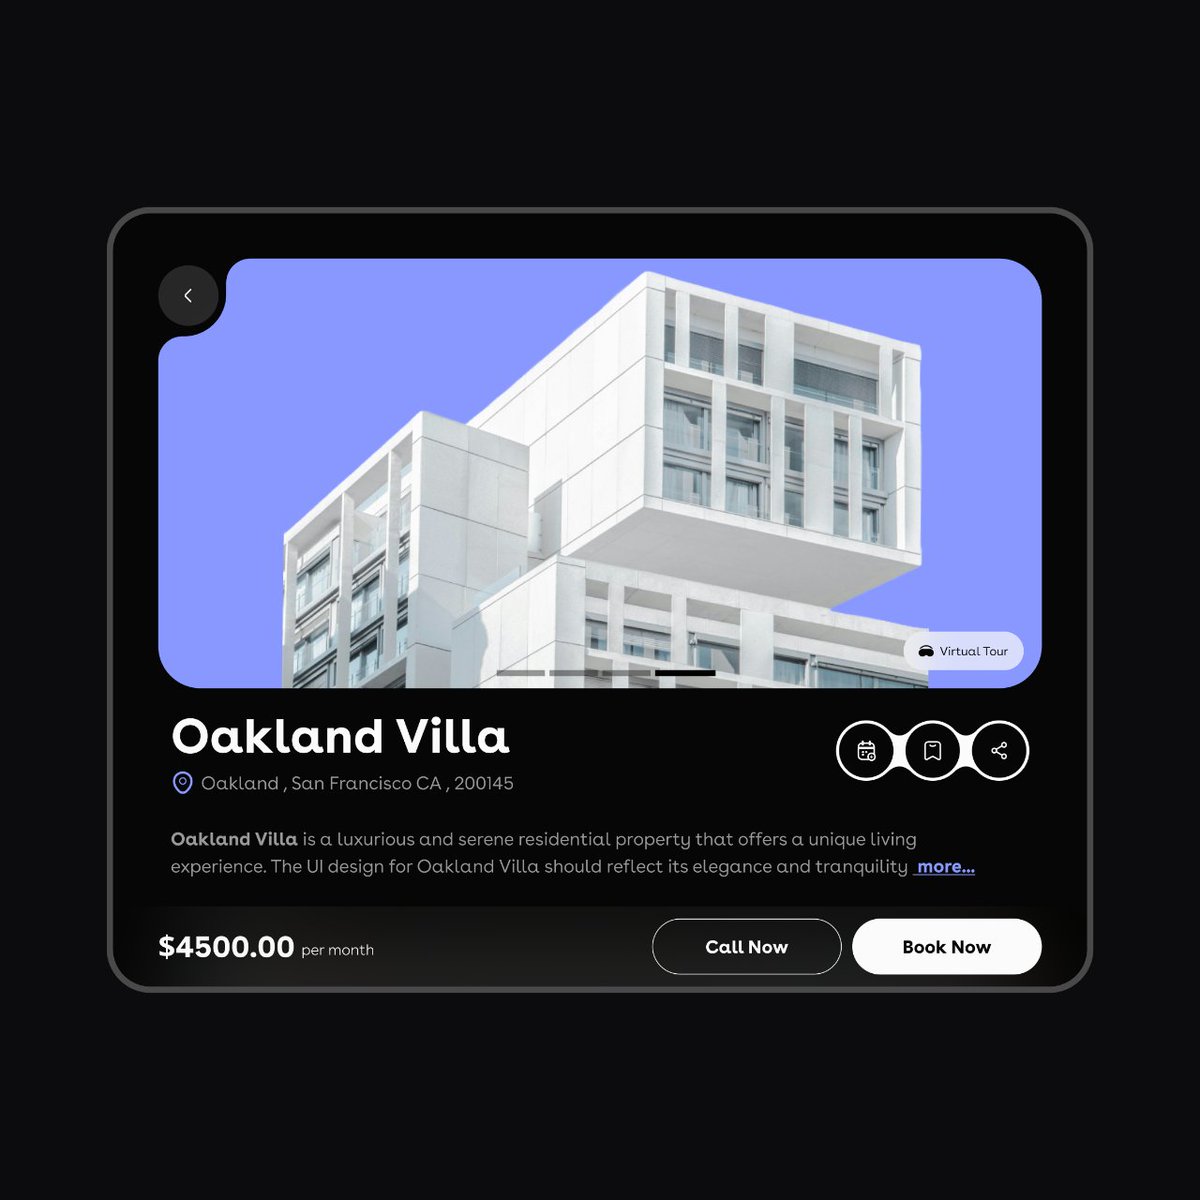 Foldable Real Estate: Explore Your Dream Home! Part 4 - Discover properties in style on foldable screens.
dribbble.com/domingo
#FoldableLiving #RealEstateTech #InnovativeDesign #FoldableScreens #DreamHome #PropertySearch #UIInspiration #FutureHomes #FoldableUI